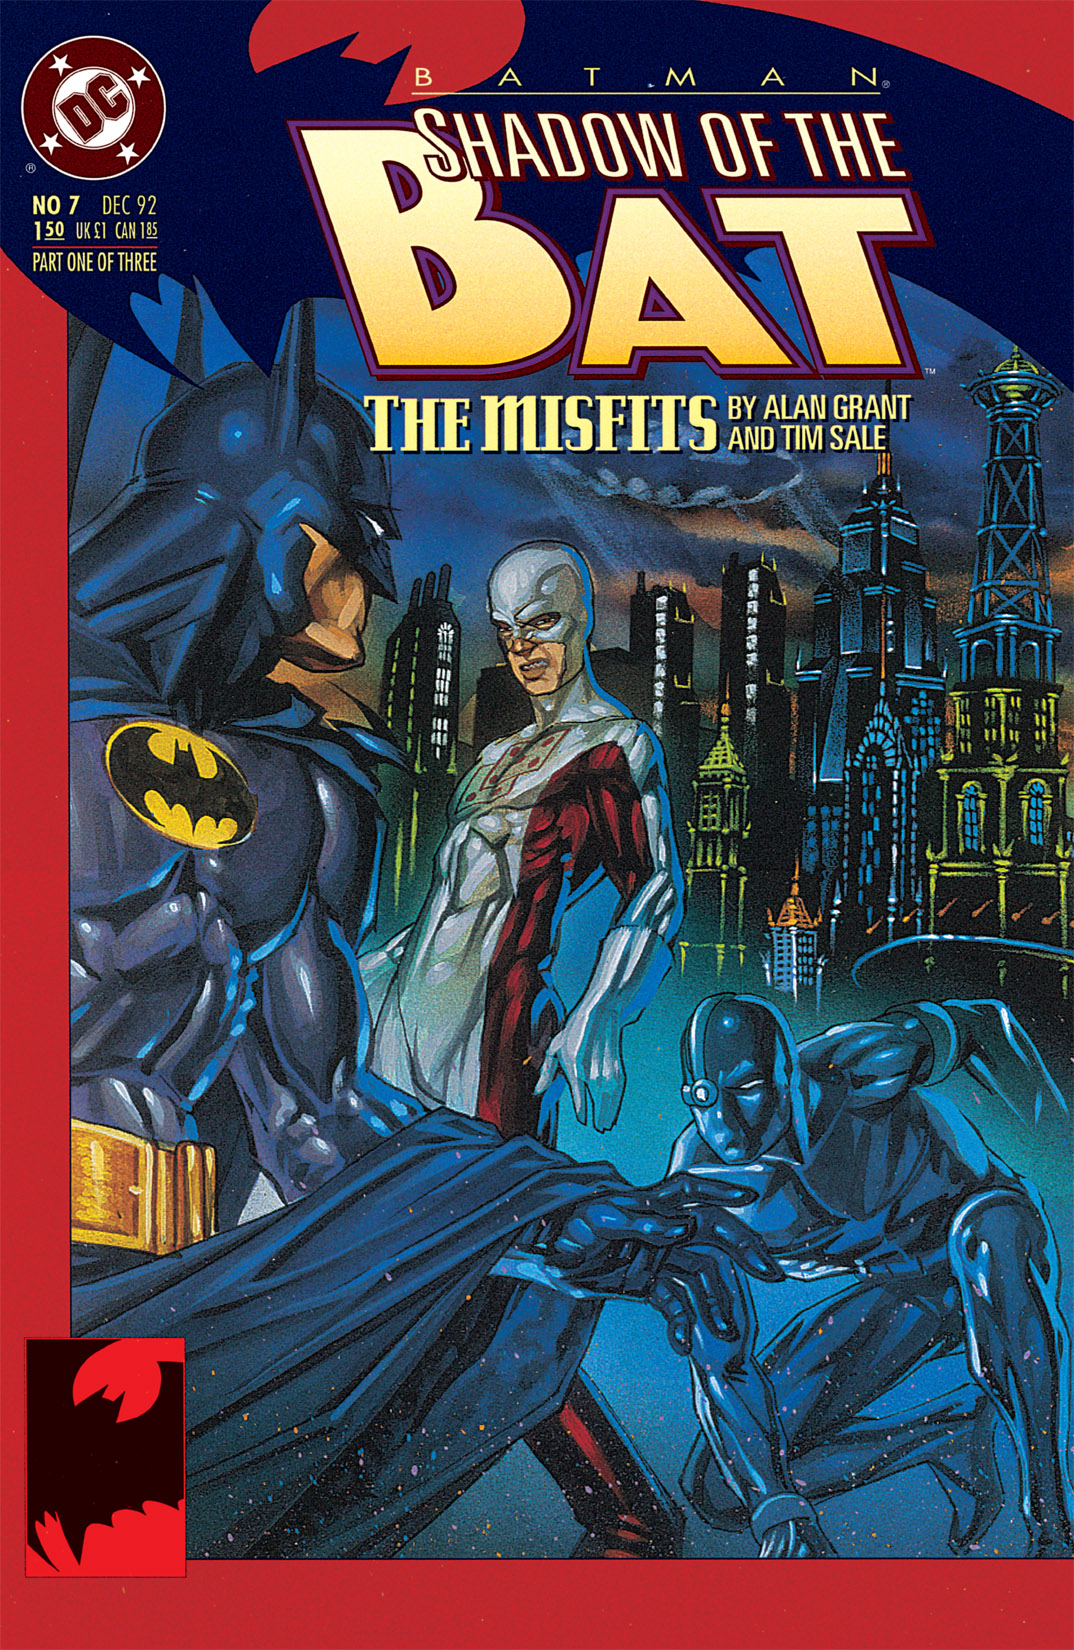 Read Batman Shadow Of The Bat Issue Online All Page